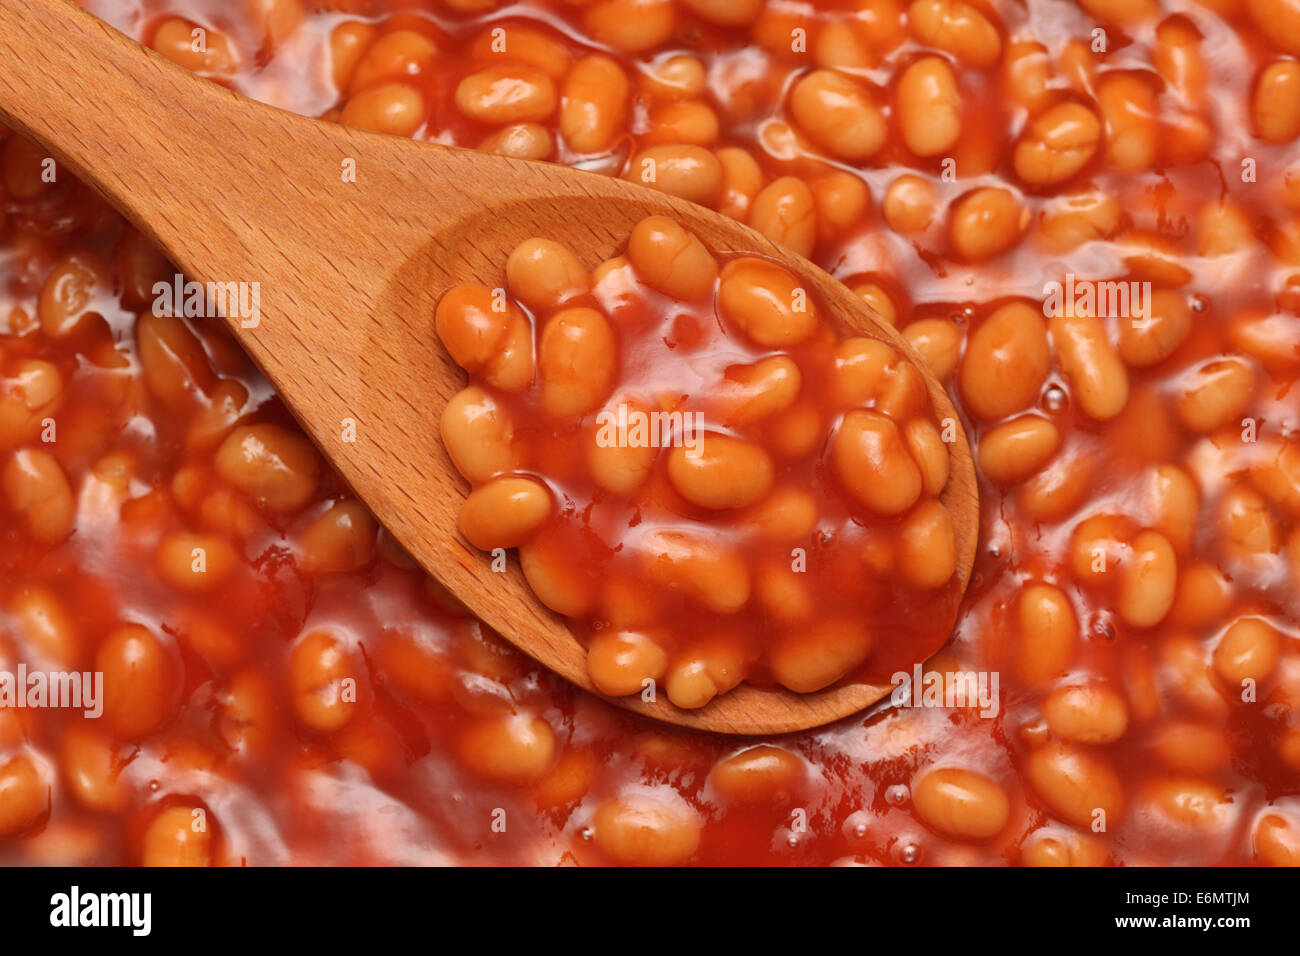 Baked beans in tomato sauce in a wooden spoon. Stock Photo